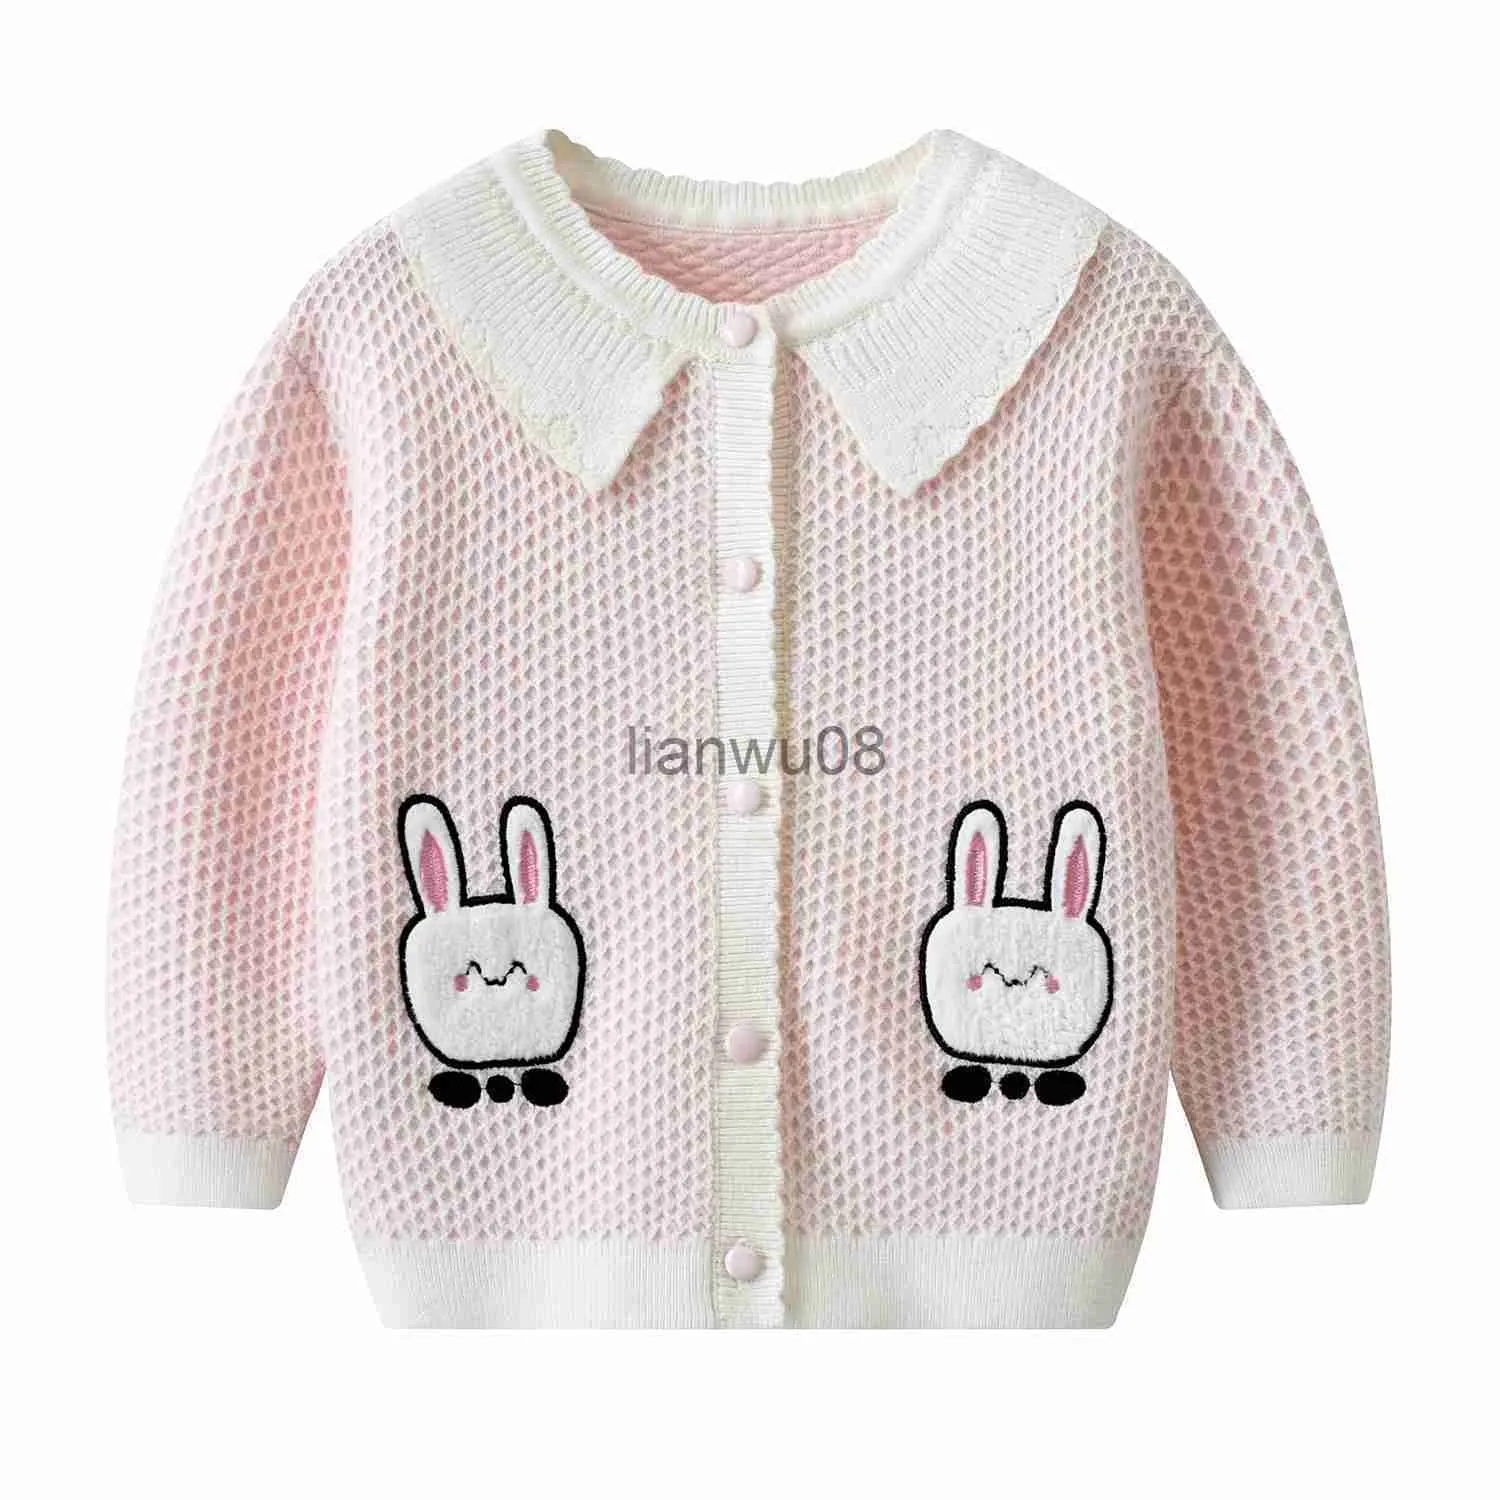 Pullover Spring New Kids Girls 'Clothes Baby Outfits Sticked Cardigan Sweaters Coats For Children Girls' Tyg 1: a Baby Födelsedagströjor X0818